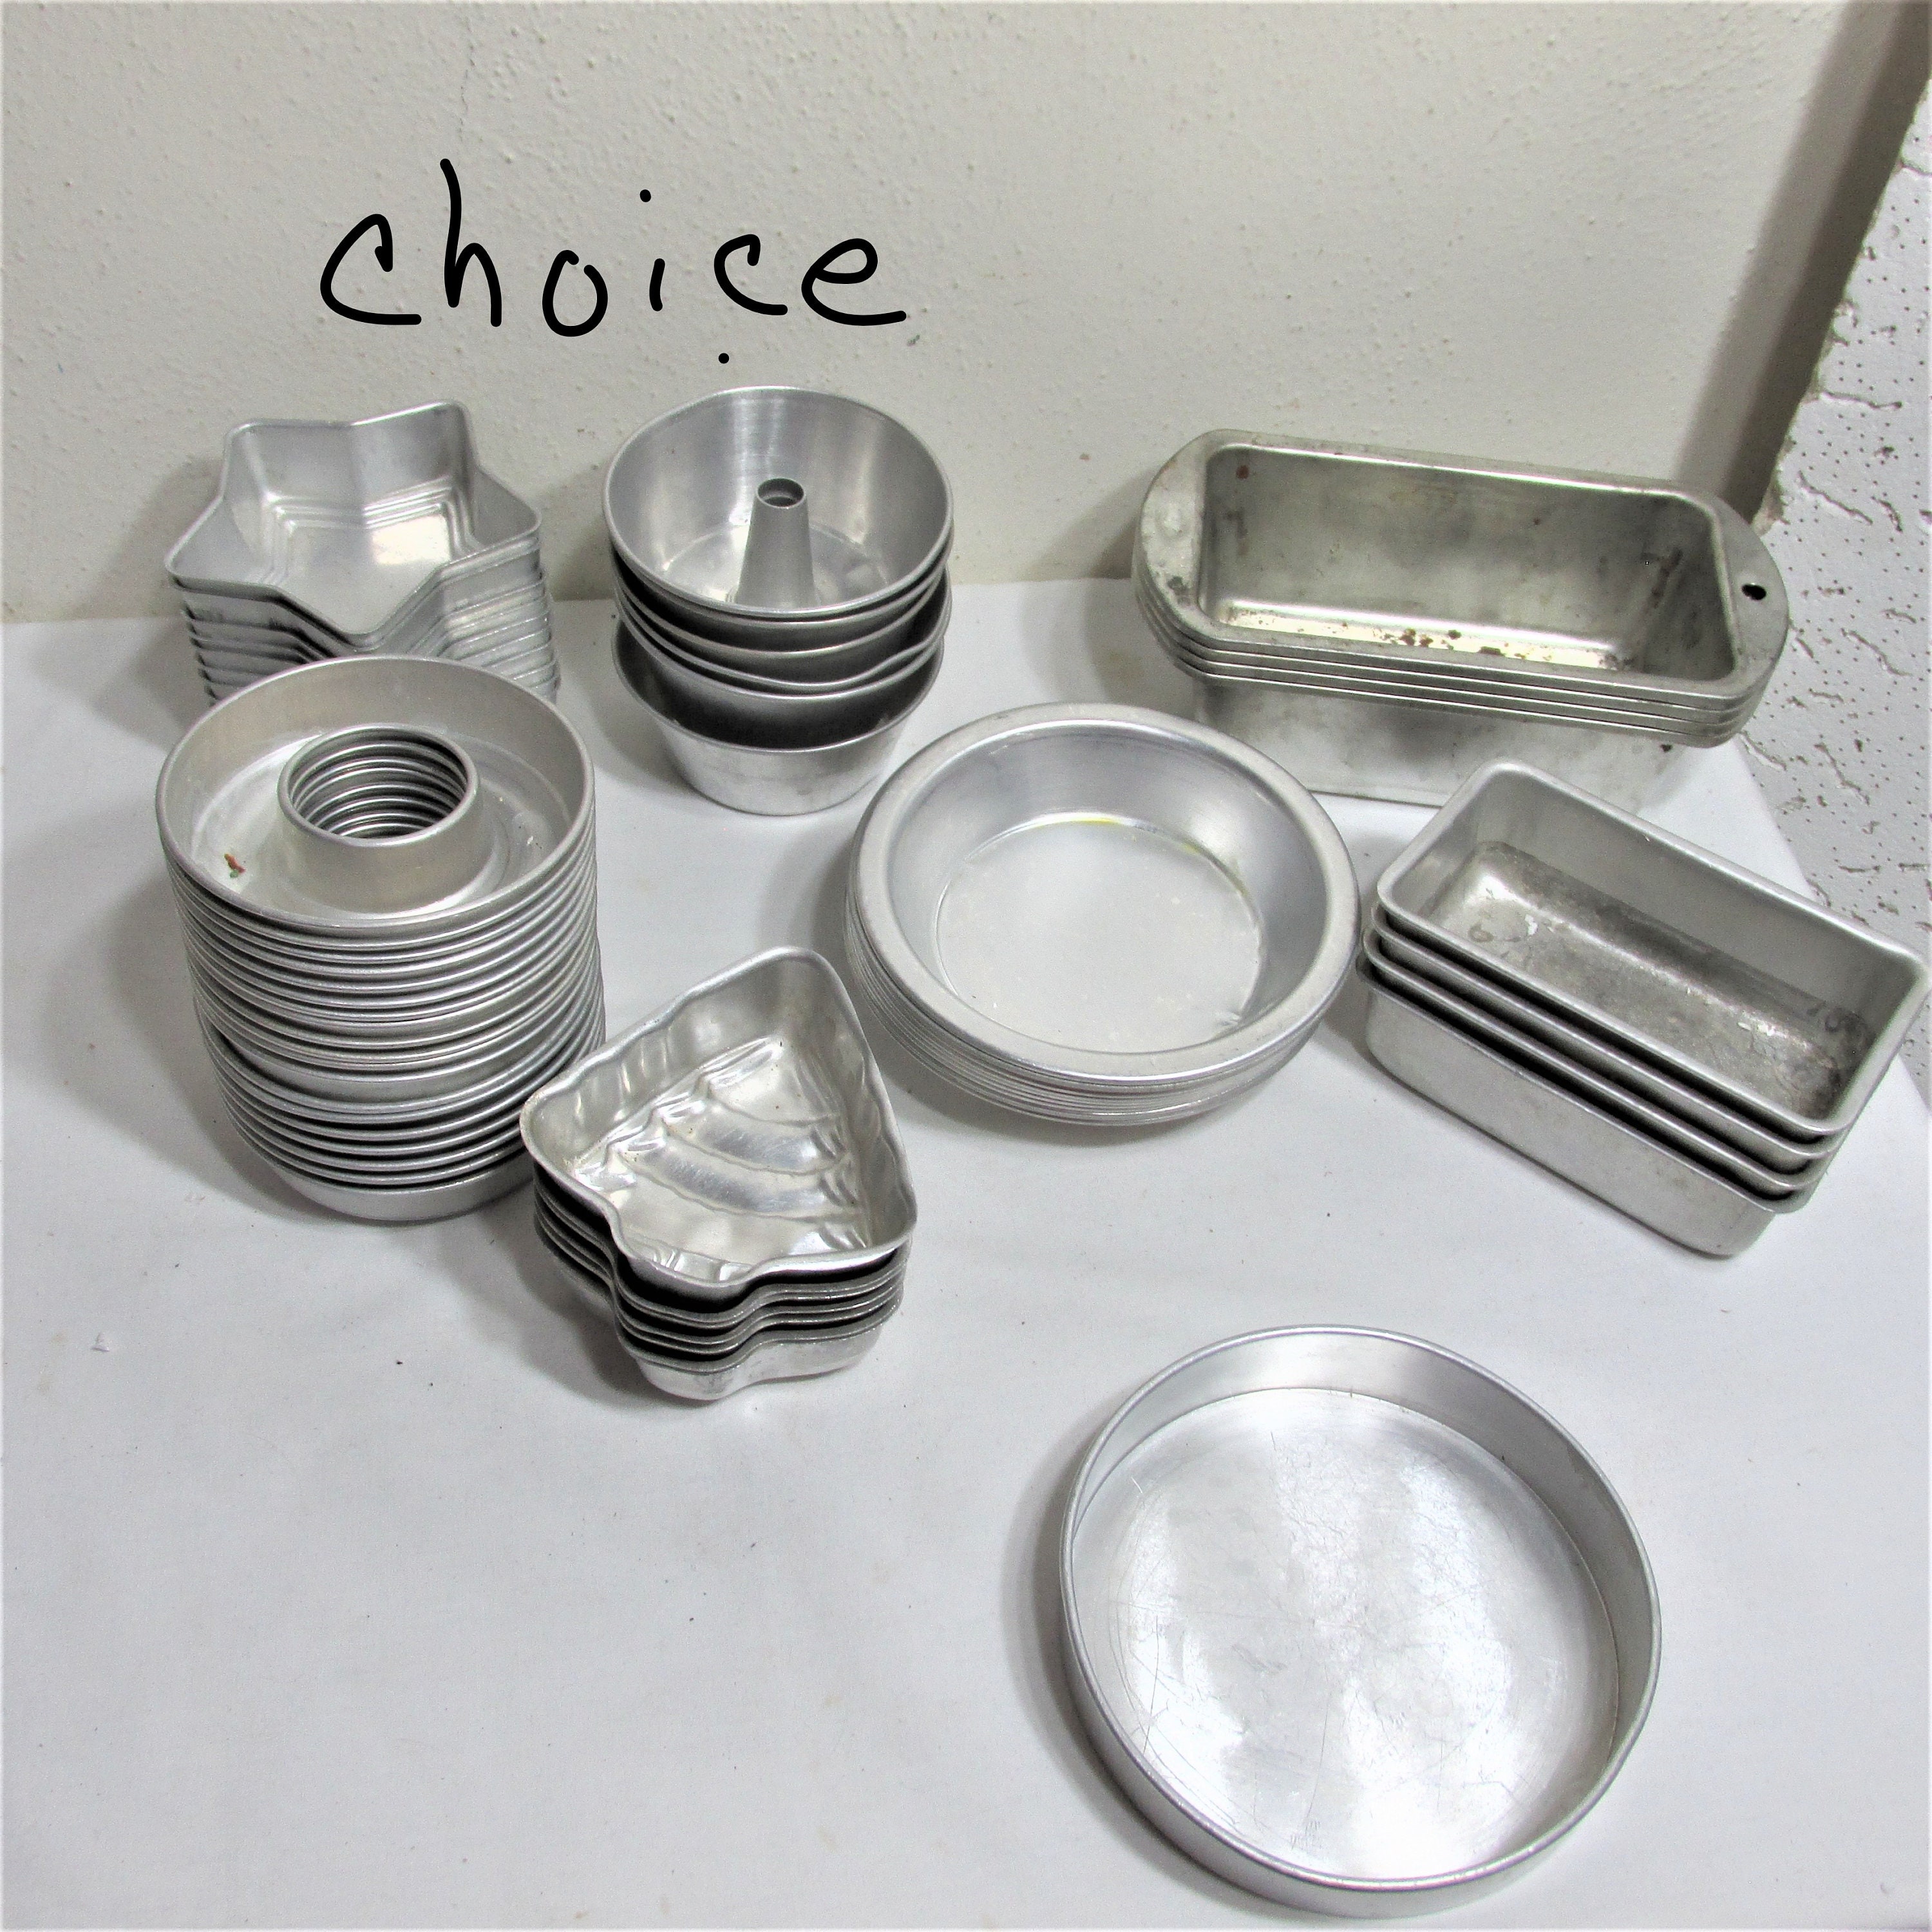 HOMEMAXS 1 Set Candle Making Aluminum Candle Tins Cotton Candle Wicks Empty  Candle Containers Pillar Candle Molds 